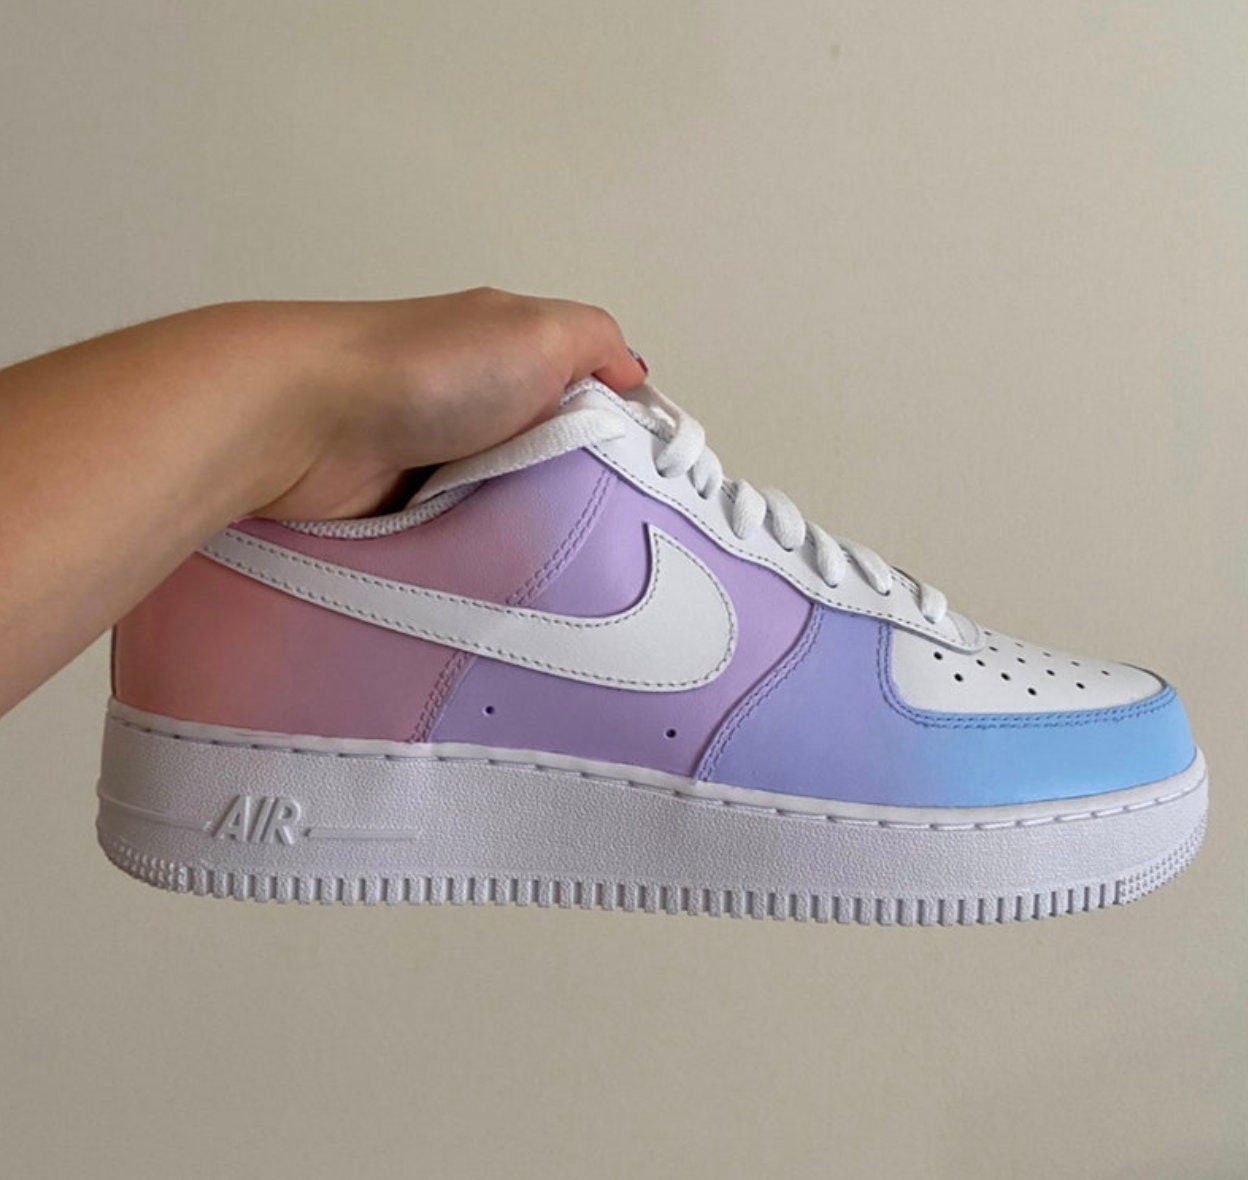 Men's Custom Nike Air Force 1s Low With Pink Lavender - Etsy